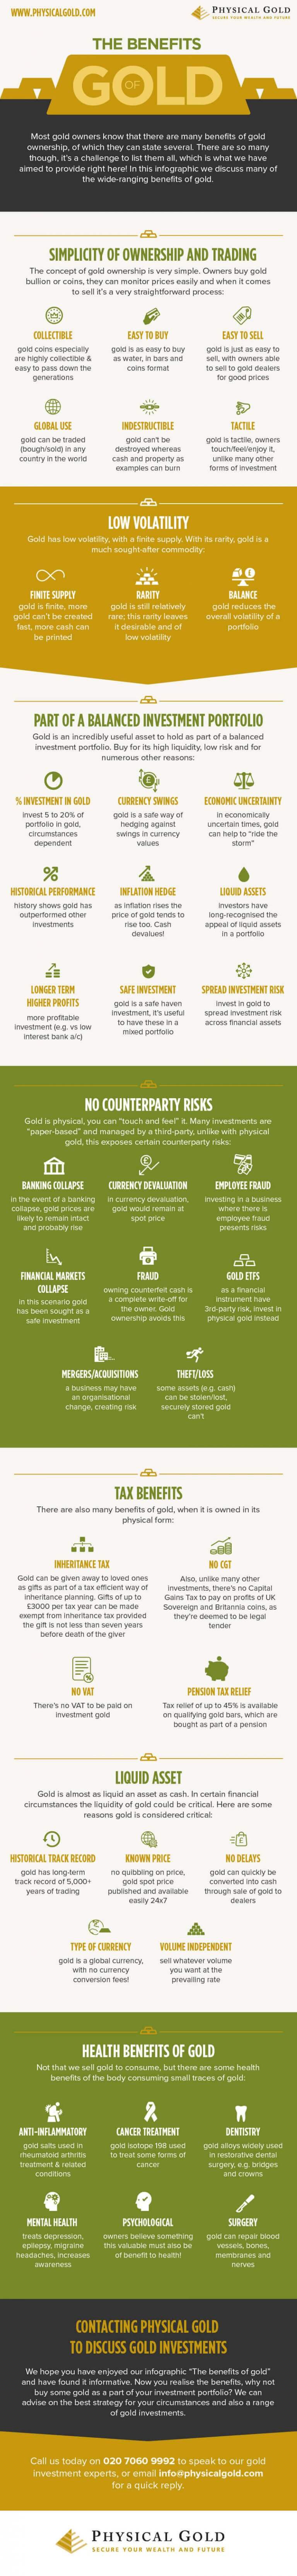 Benefits of Gold Infographic